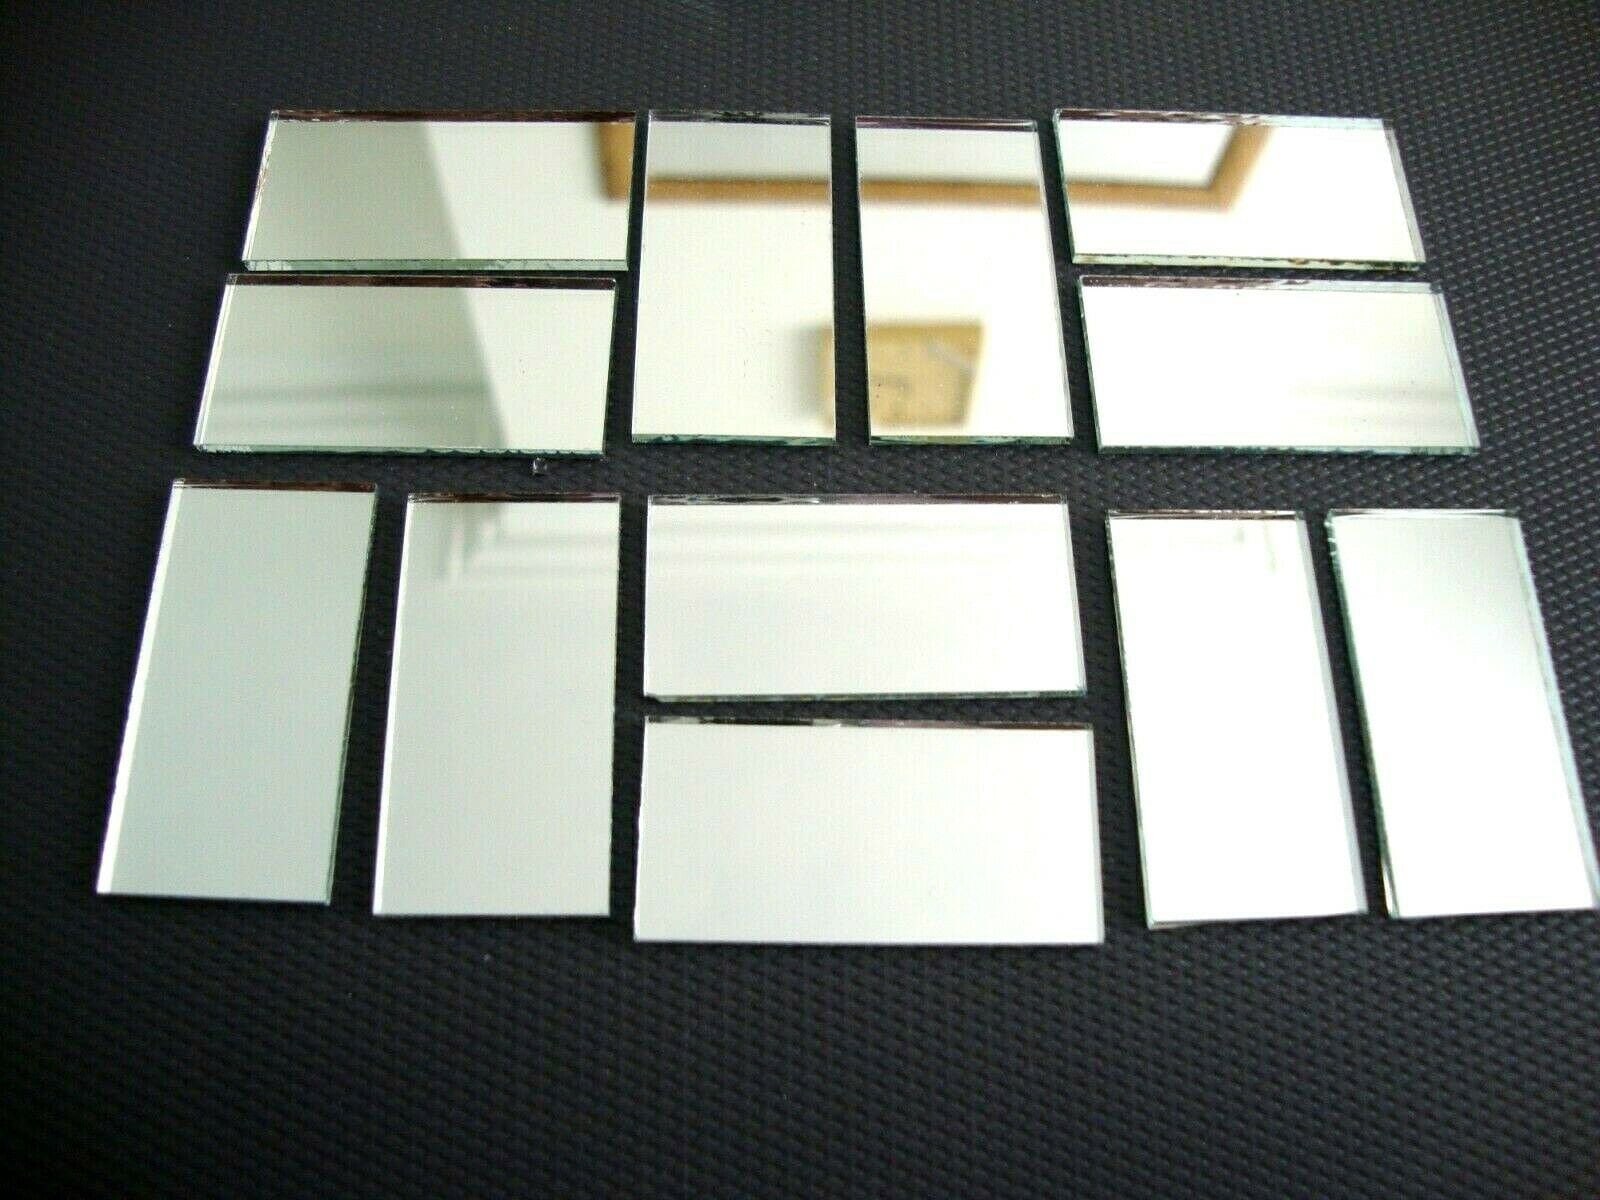 5 pieces, Silver Glass Mirror Tiles, 10 x 10 cm, 1 mm thick. Art&Craft